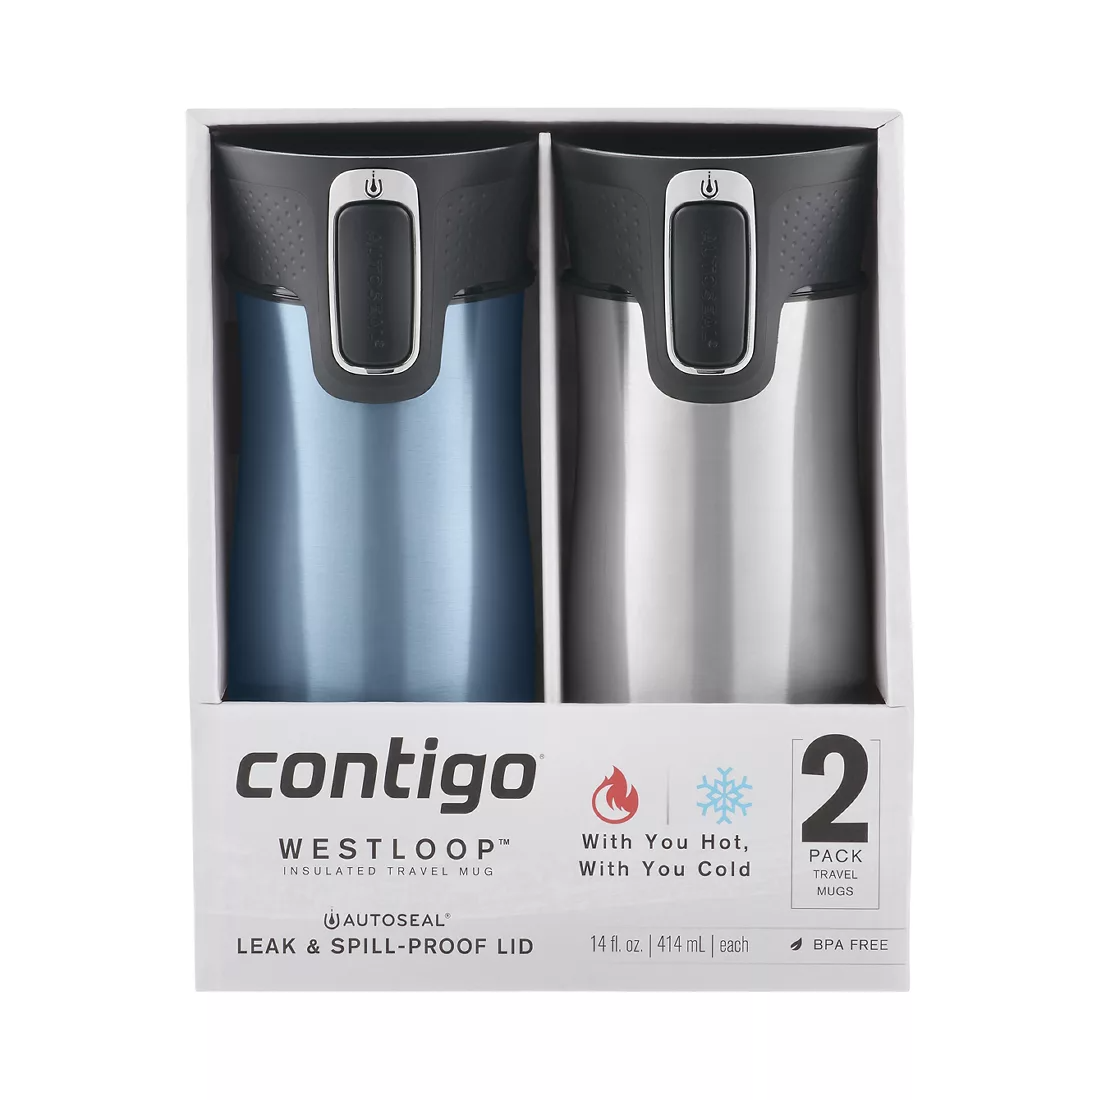 Contigo Stainless Steel Insulated Mugs are now on sale at